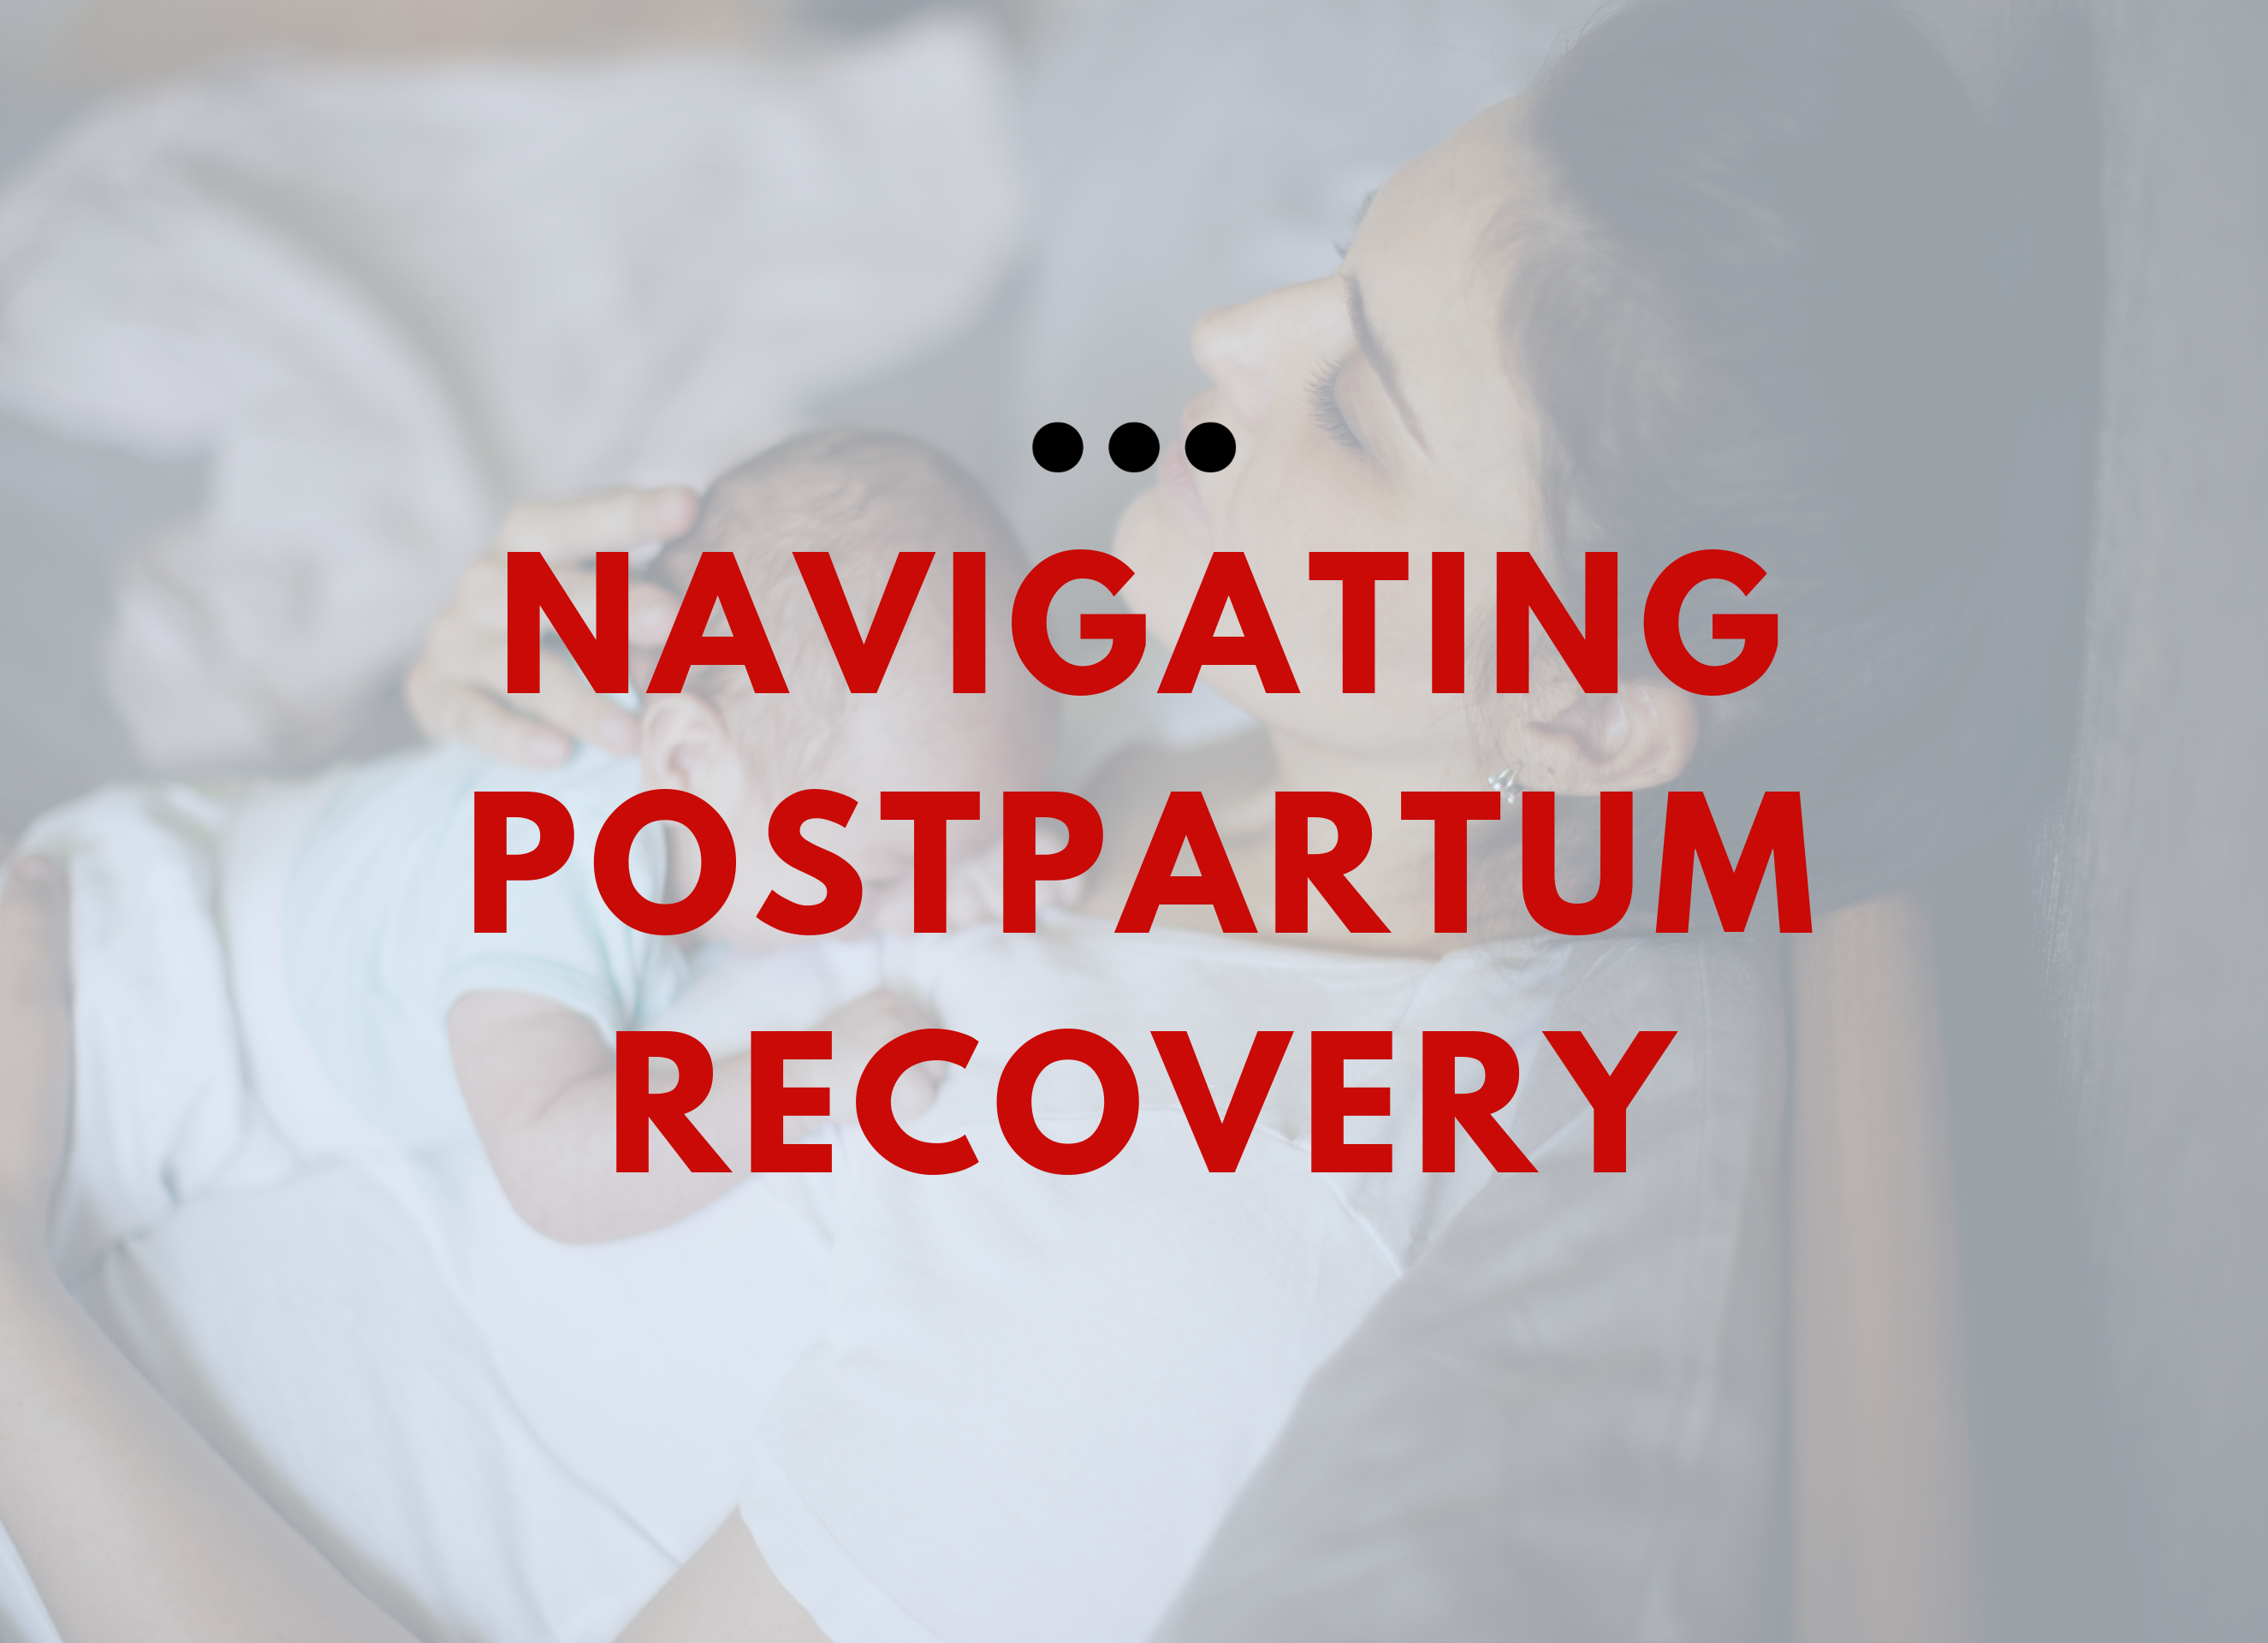 Navigating Postpartum Recovery: What to Expect from Your First